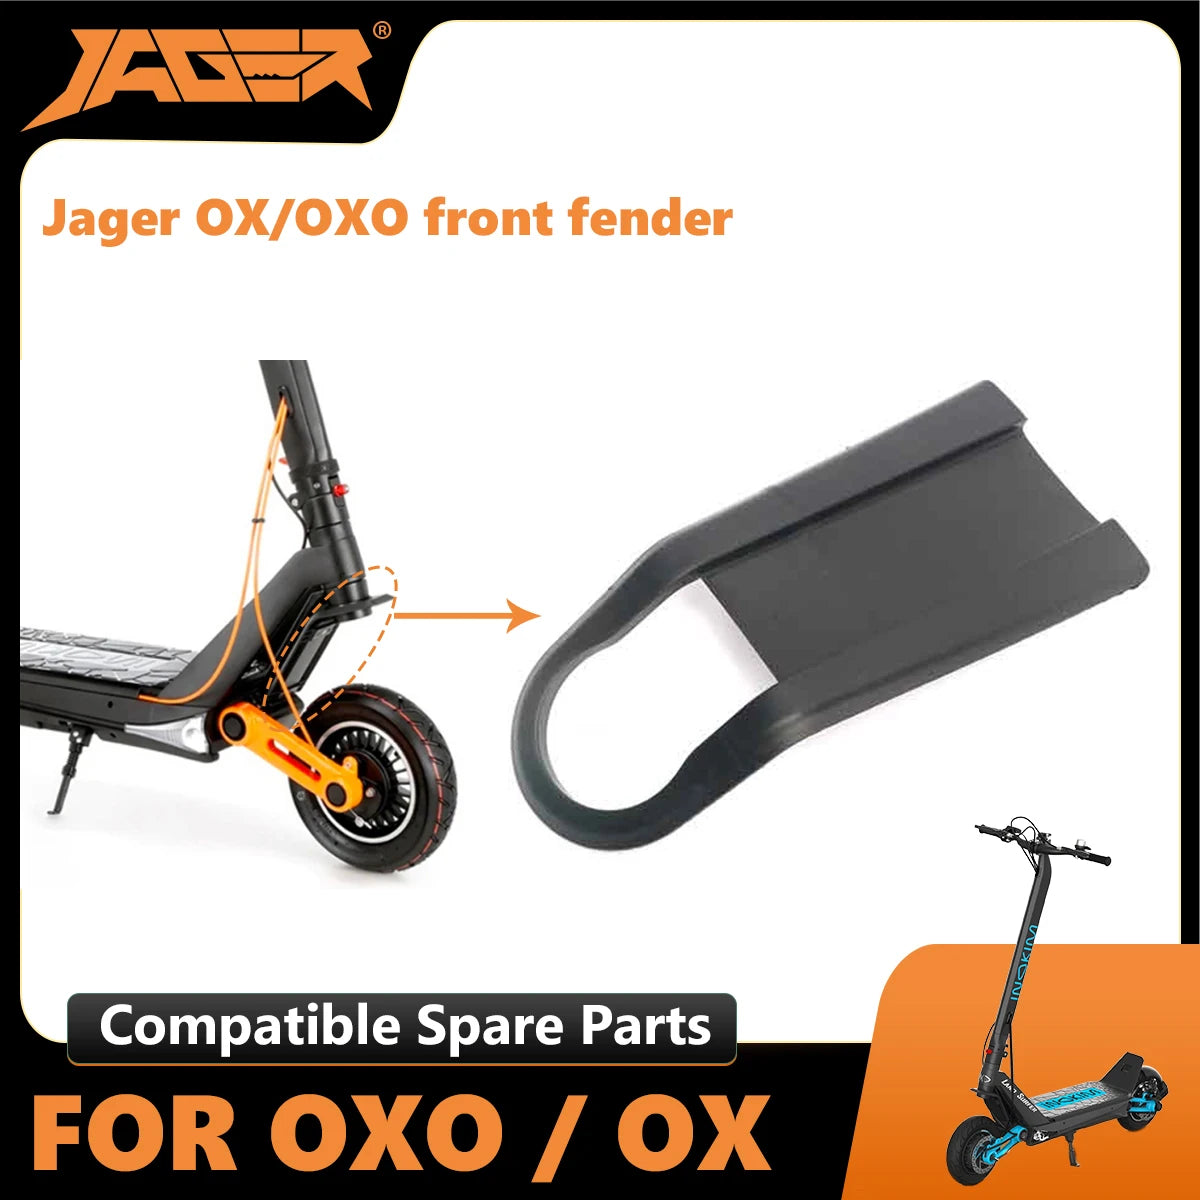 Jager front fender scooter parts compatible with Inokim OX OXO mudguard wider than original inokim parts accessories